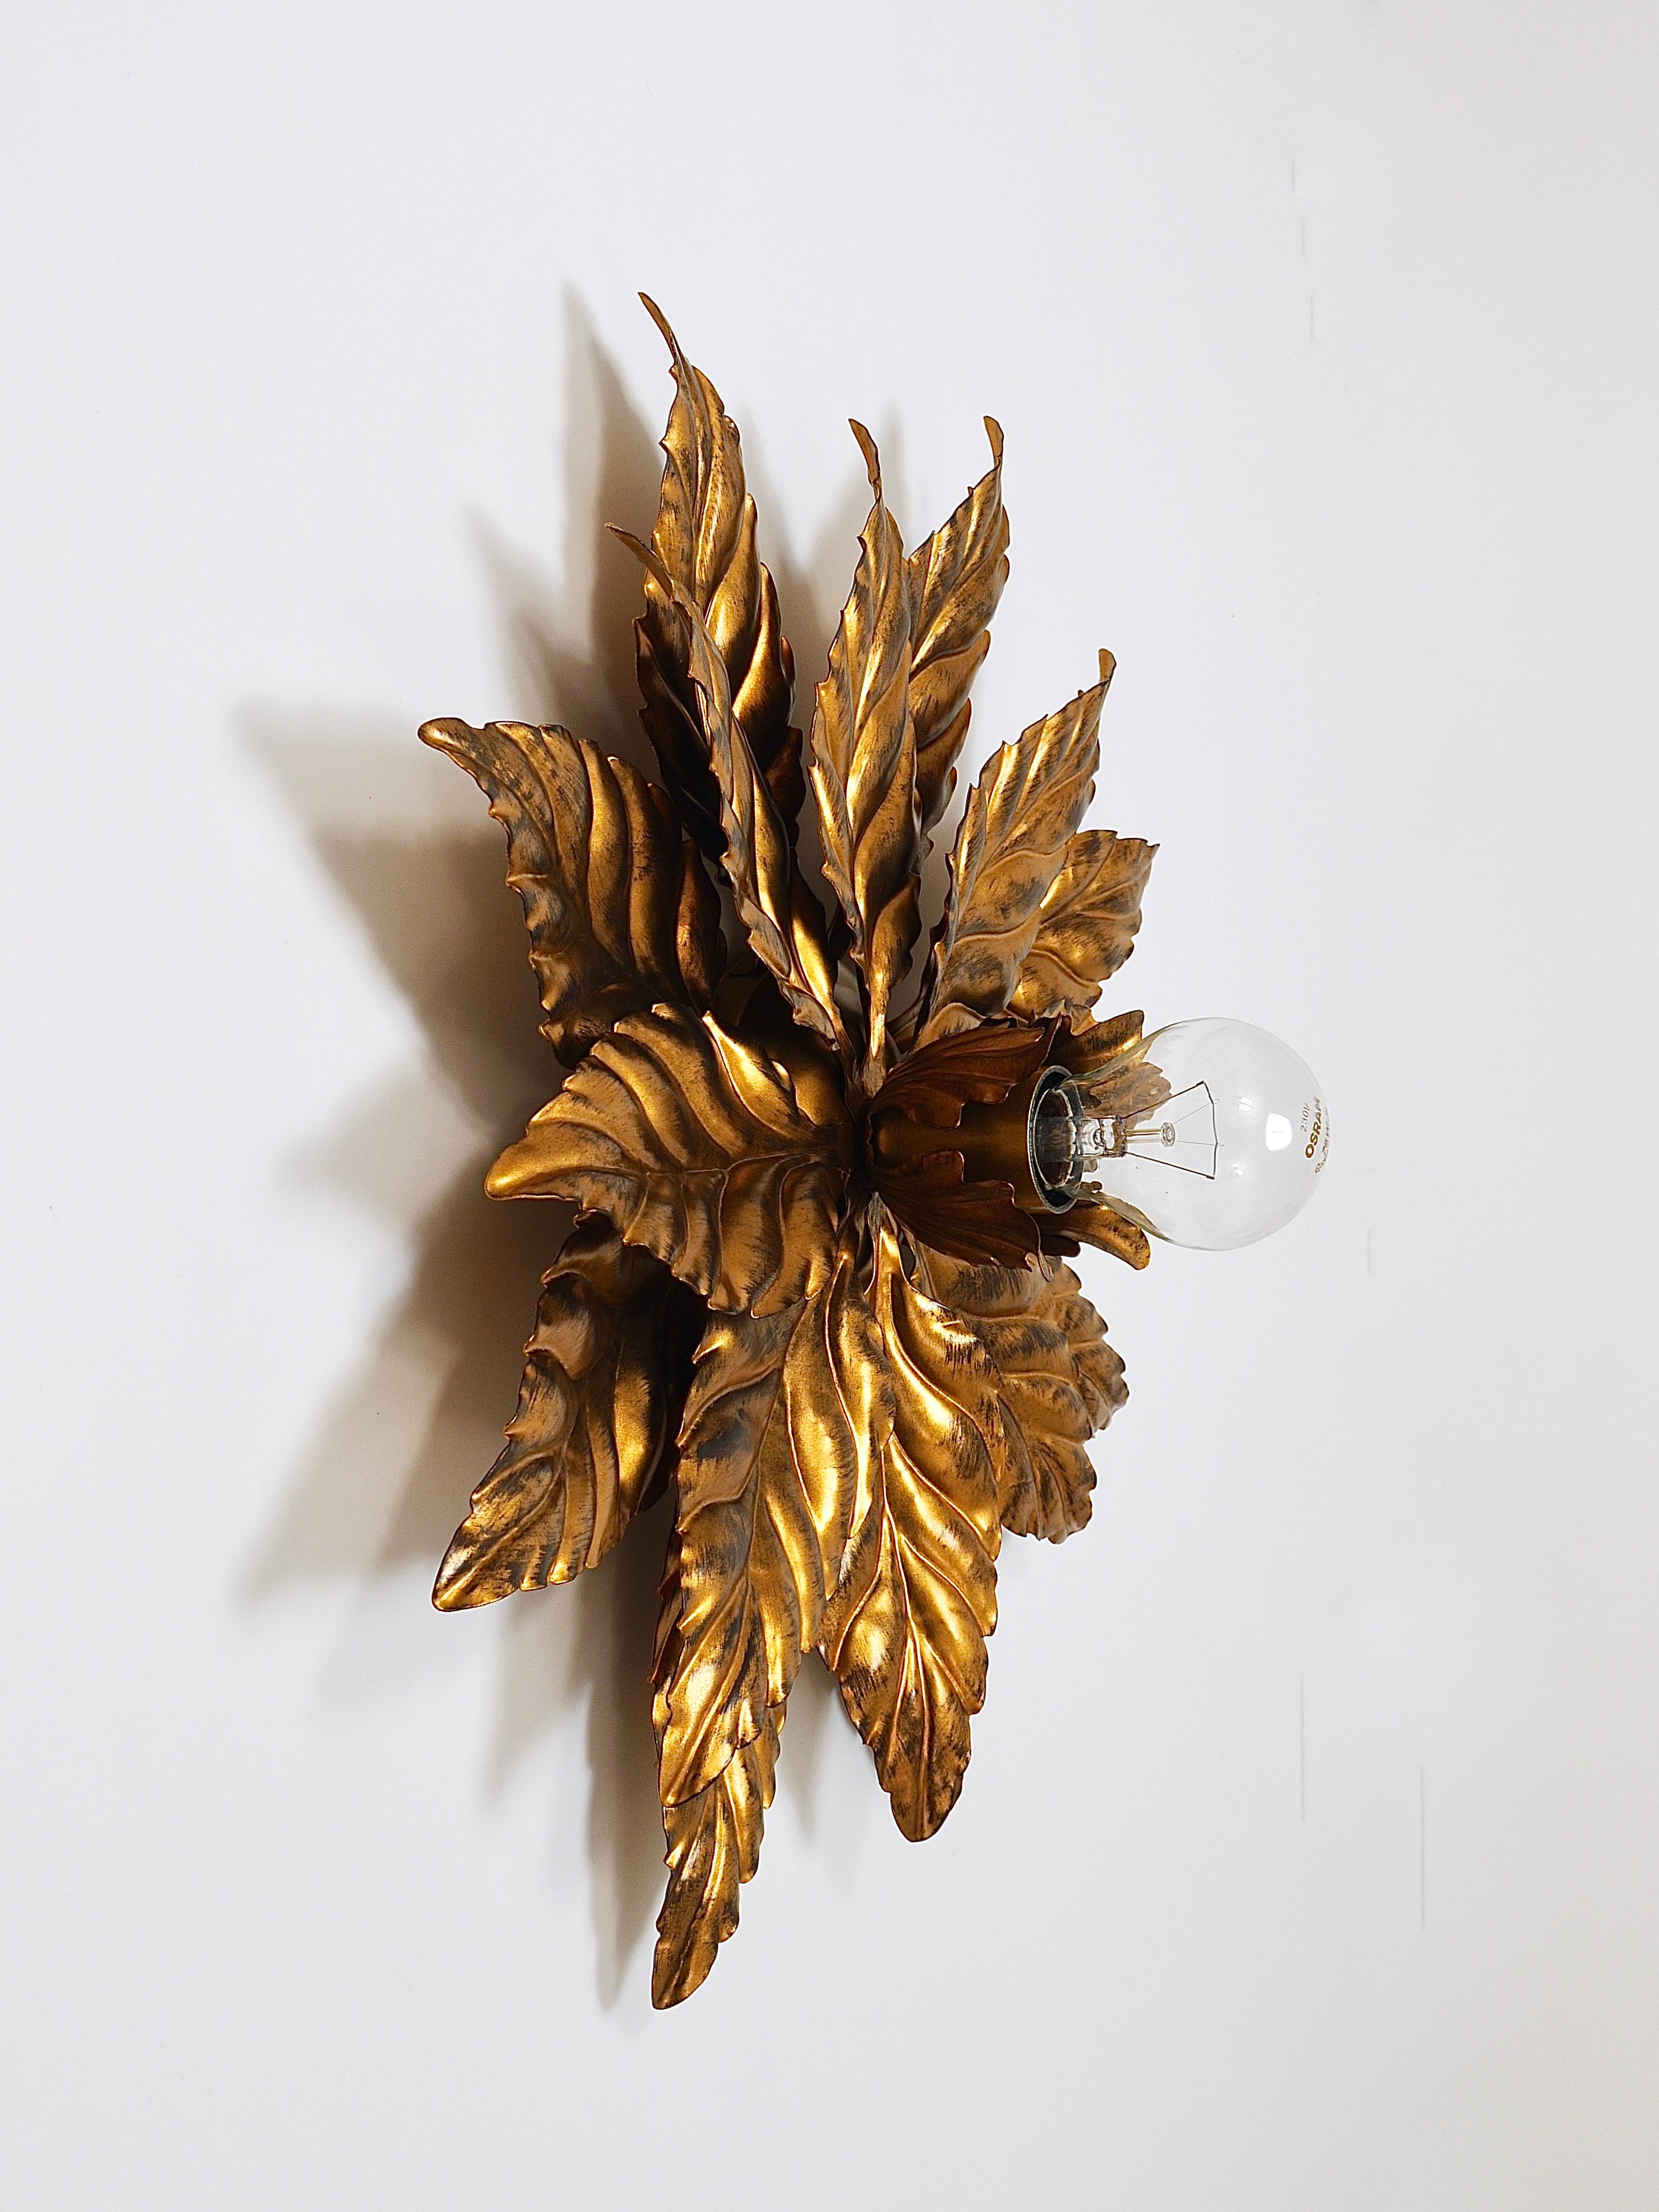 Up to two identical handcrafted decorative Florentine floral leaf lights designed by Hans Kögl / Koegl, who is also famous for his impressive palm tree floor lamps. Suitable to be used as wall lights / scones or as ceiling lights / flush mounts.